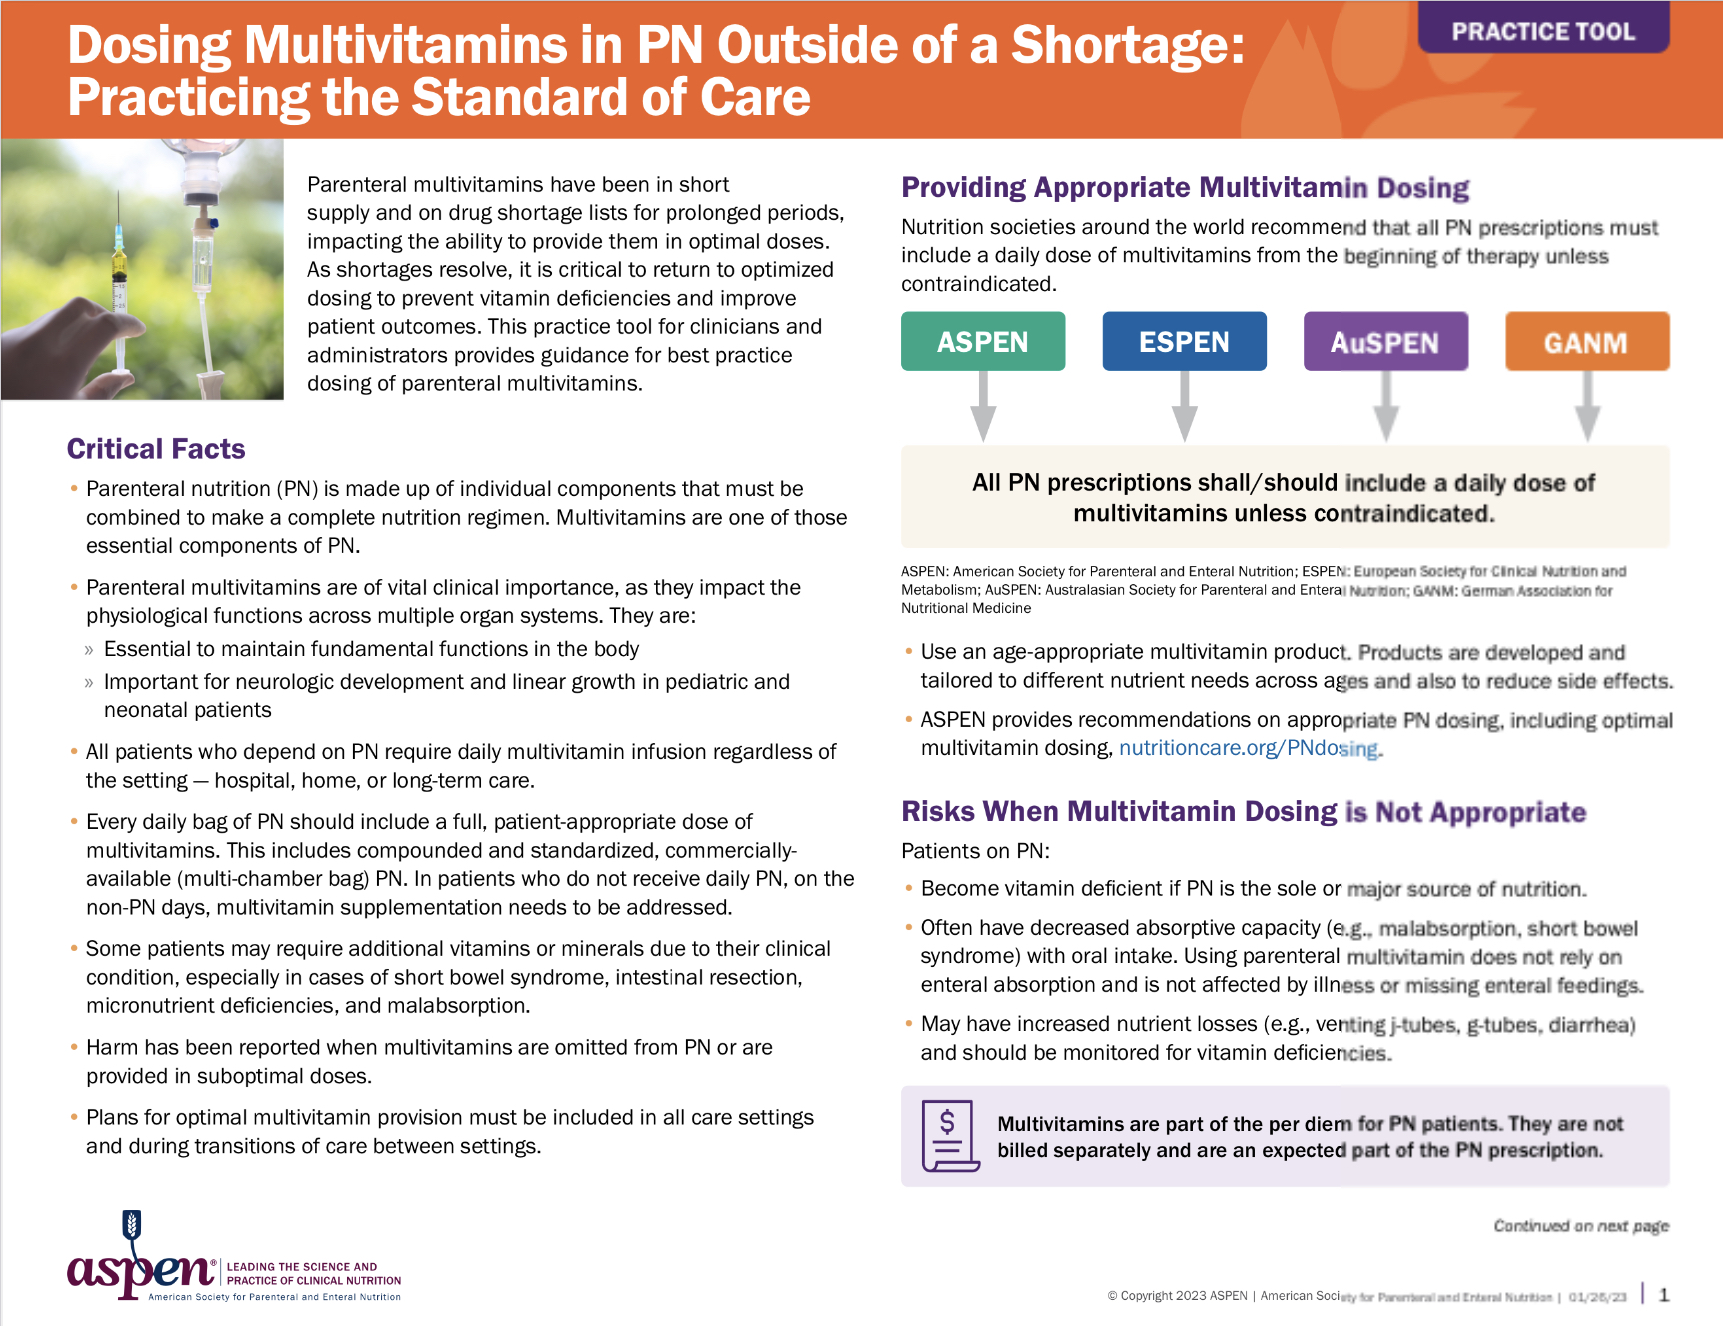 Dosing Multivitamins in PN outside of a shortage: practicing the standard of Care